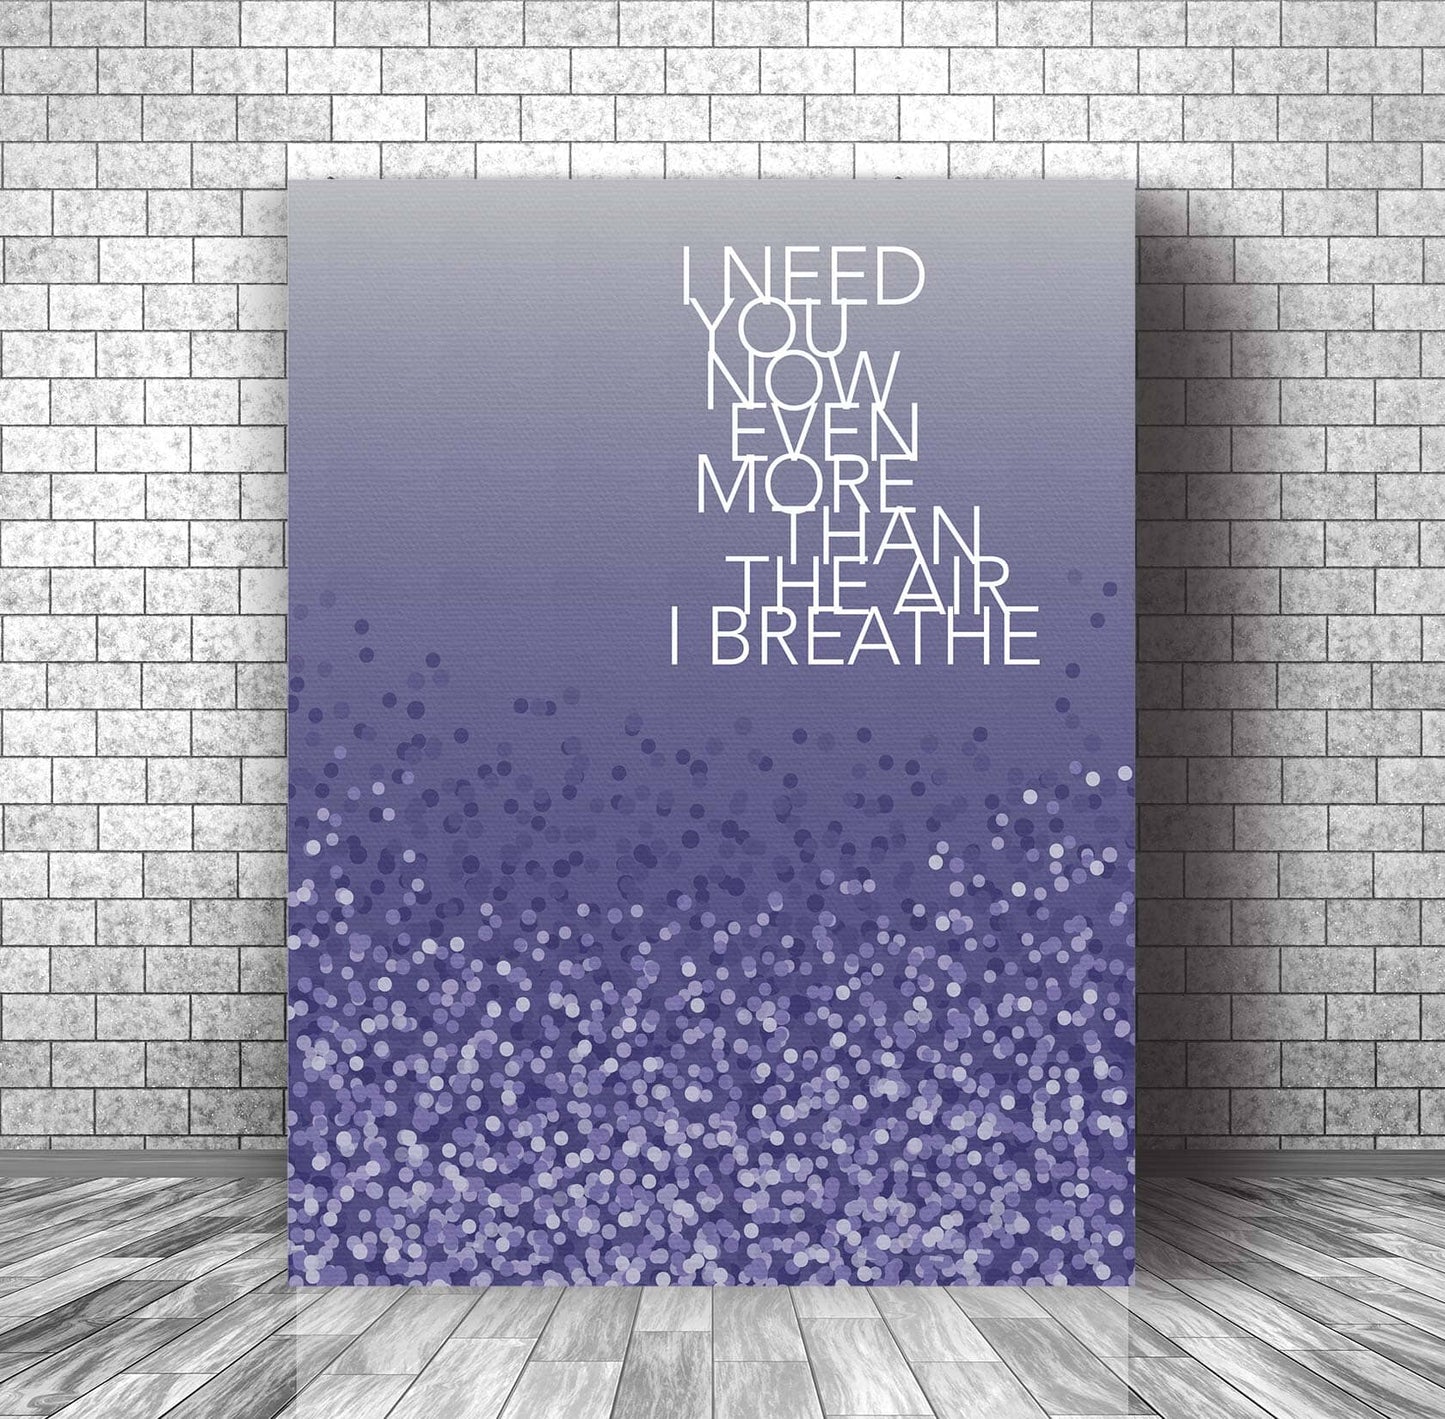 When You Got a Good Thing by Lady Antebellum - Pop Song Art Song Lyrics Art Song Lyrics Art 11x14 Canvas Wrap 